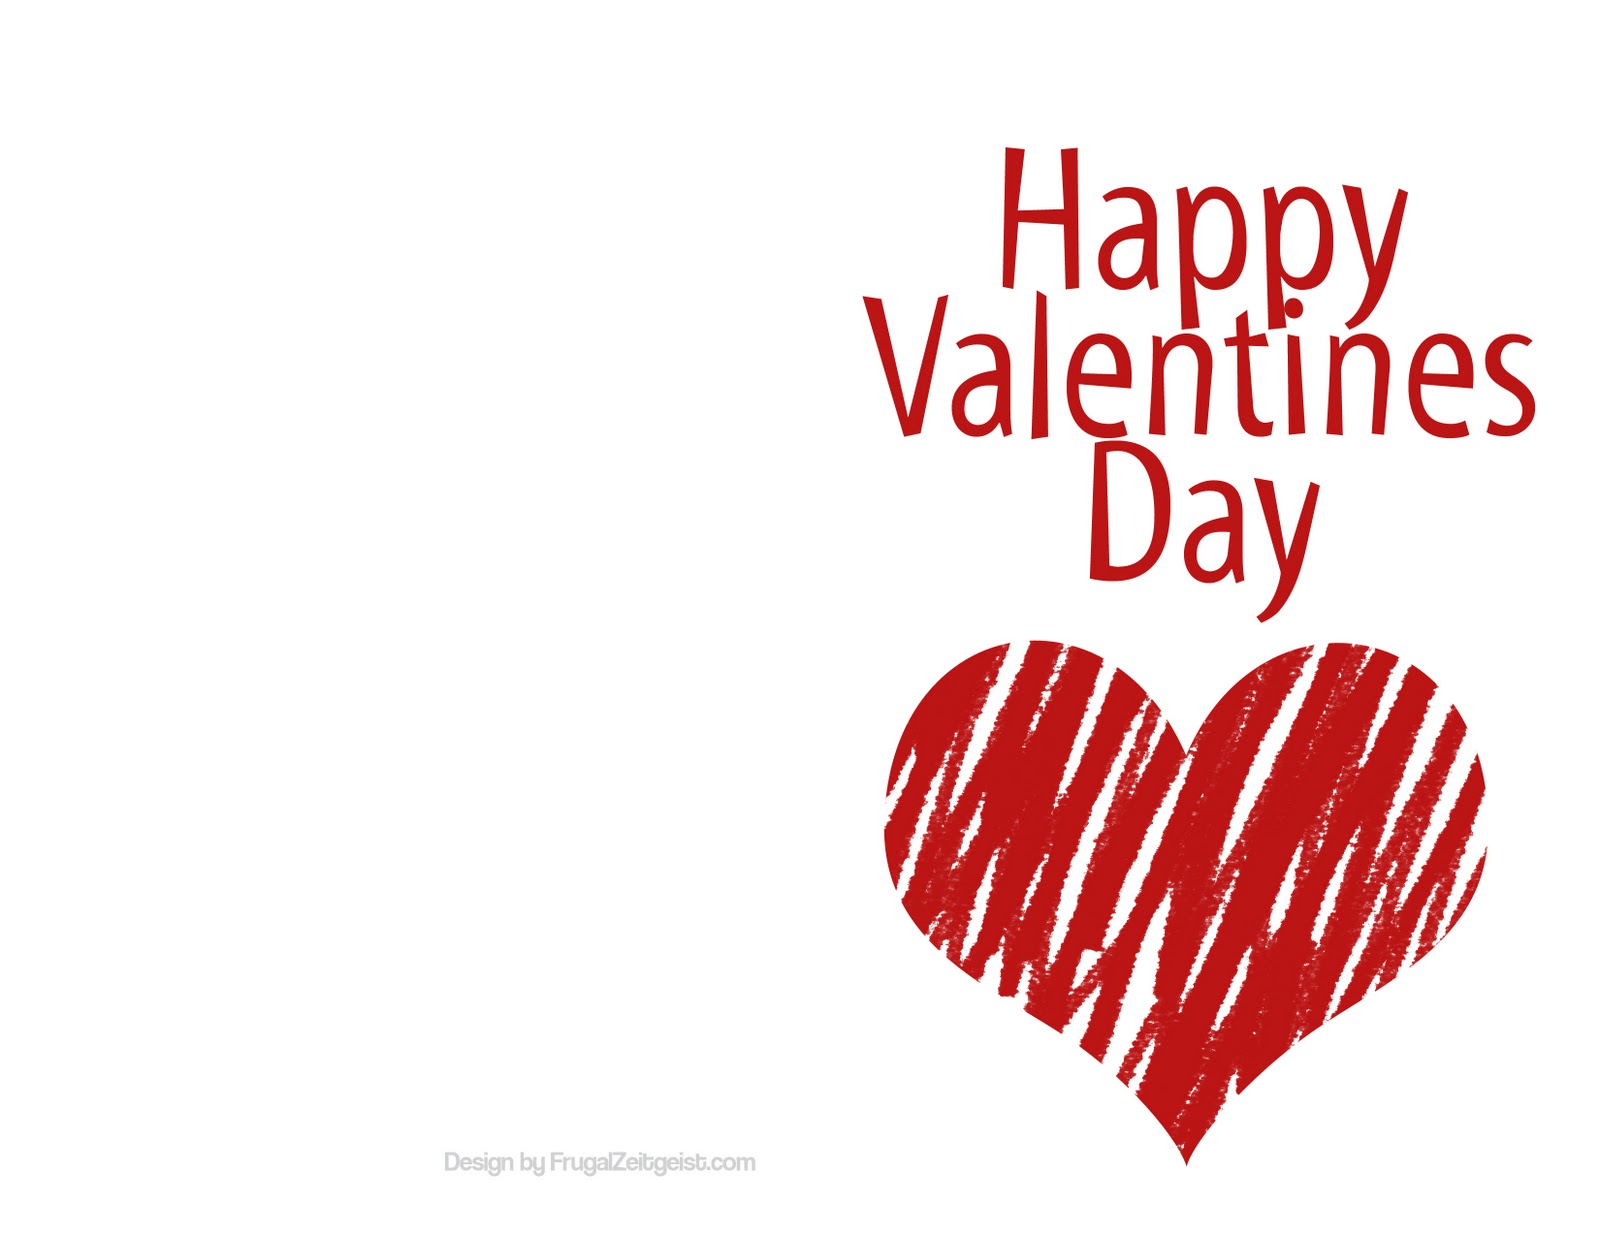 01 Birthday Wishes: The Valentine's Day Card - What is It's History?1600 x 1236